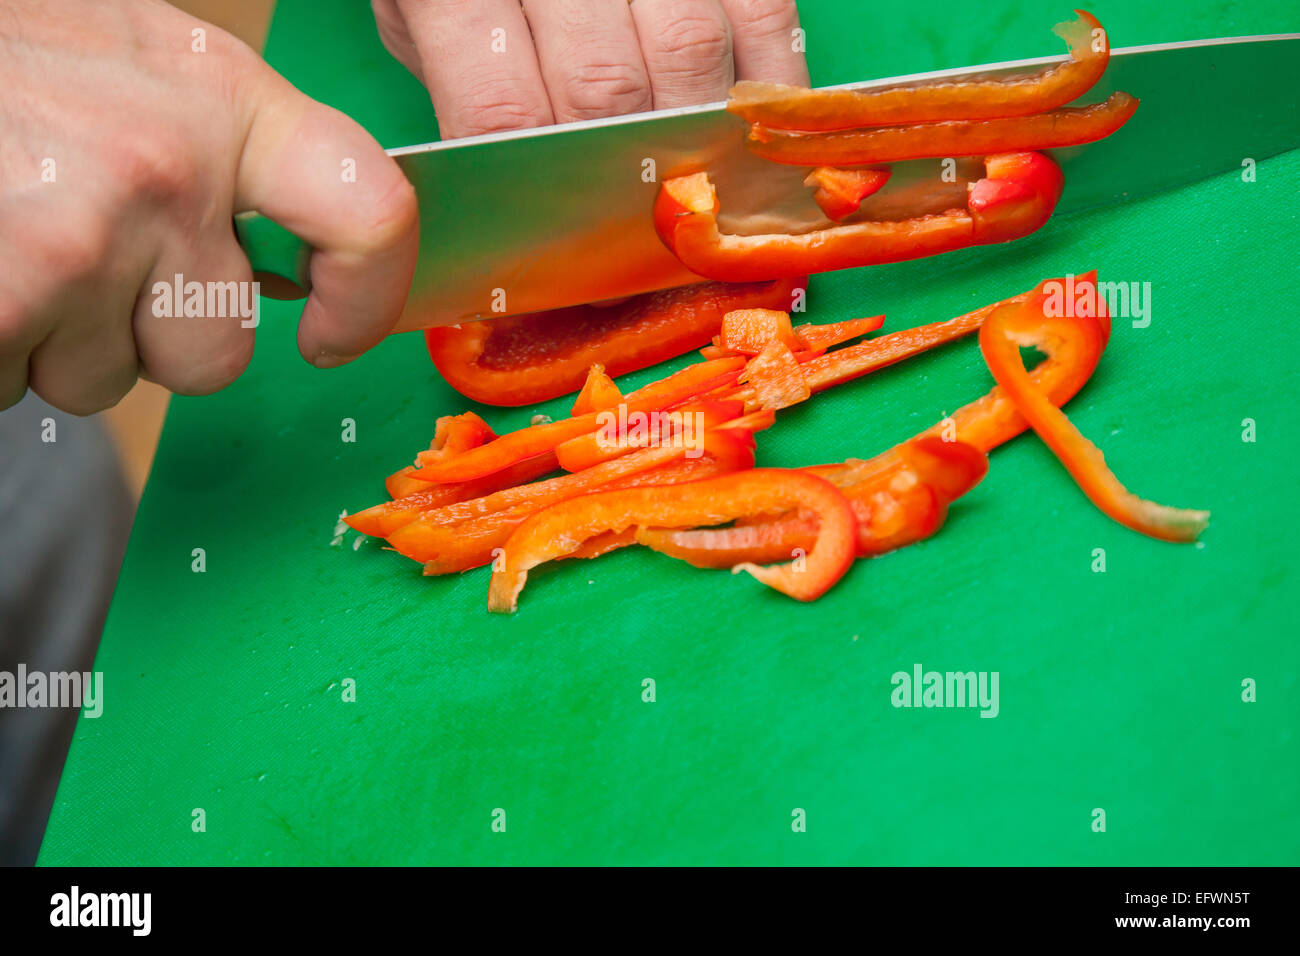 Food Preparation - Cutting a Red Bell Pepper Stock Photo